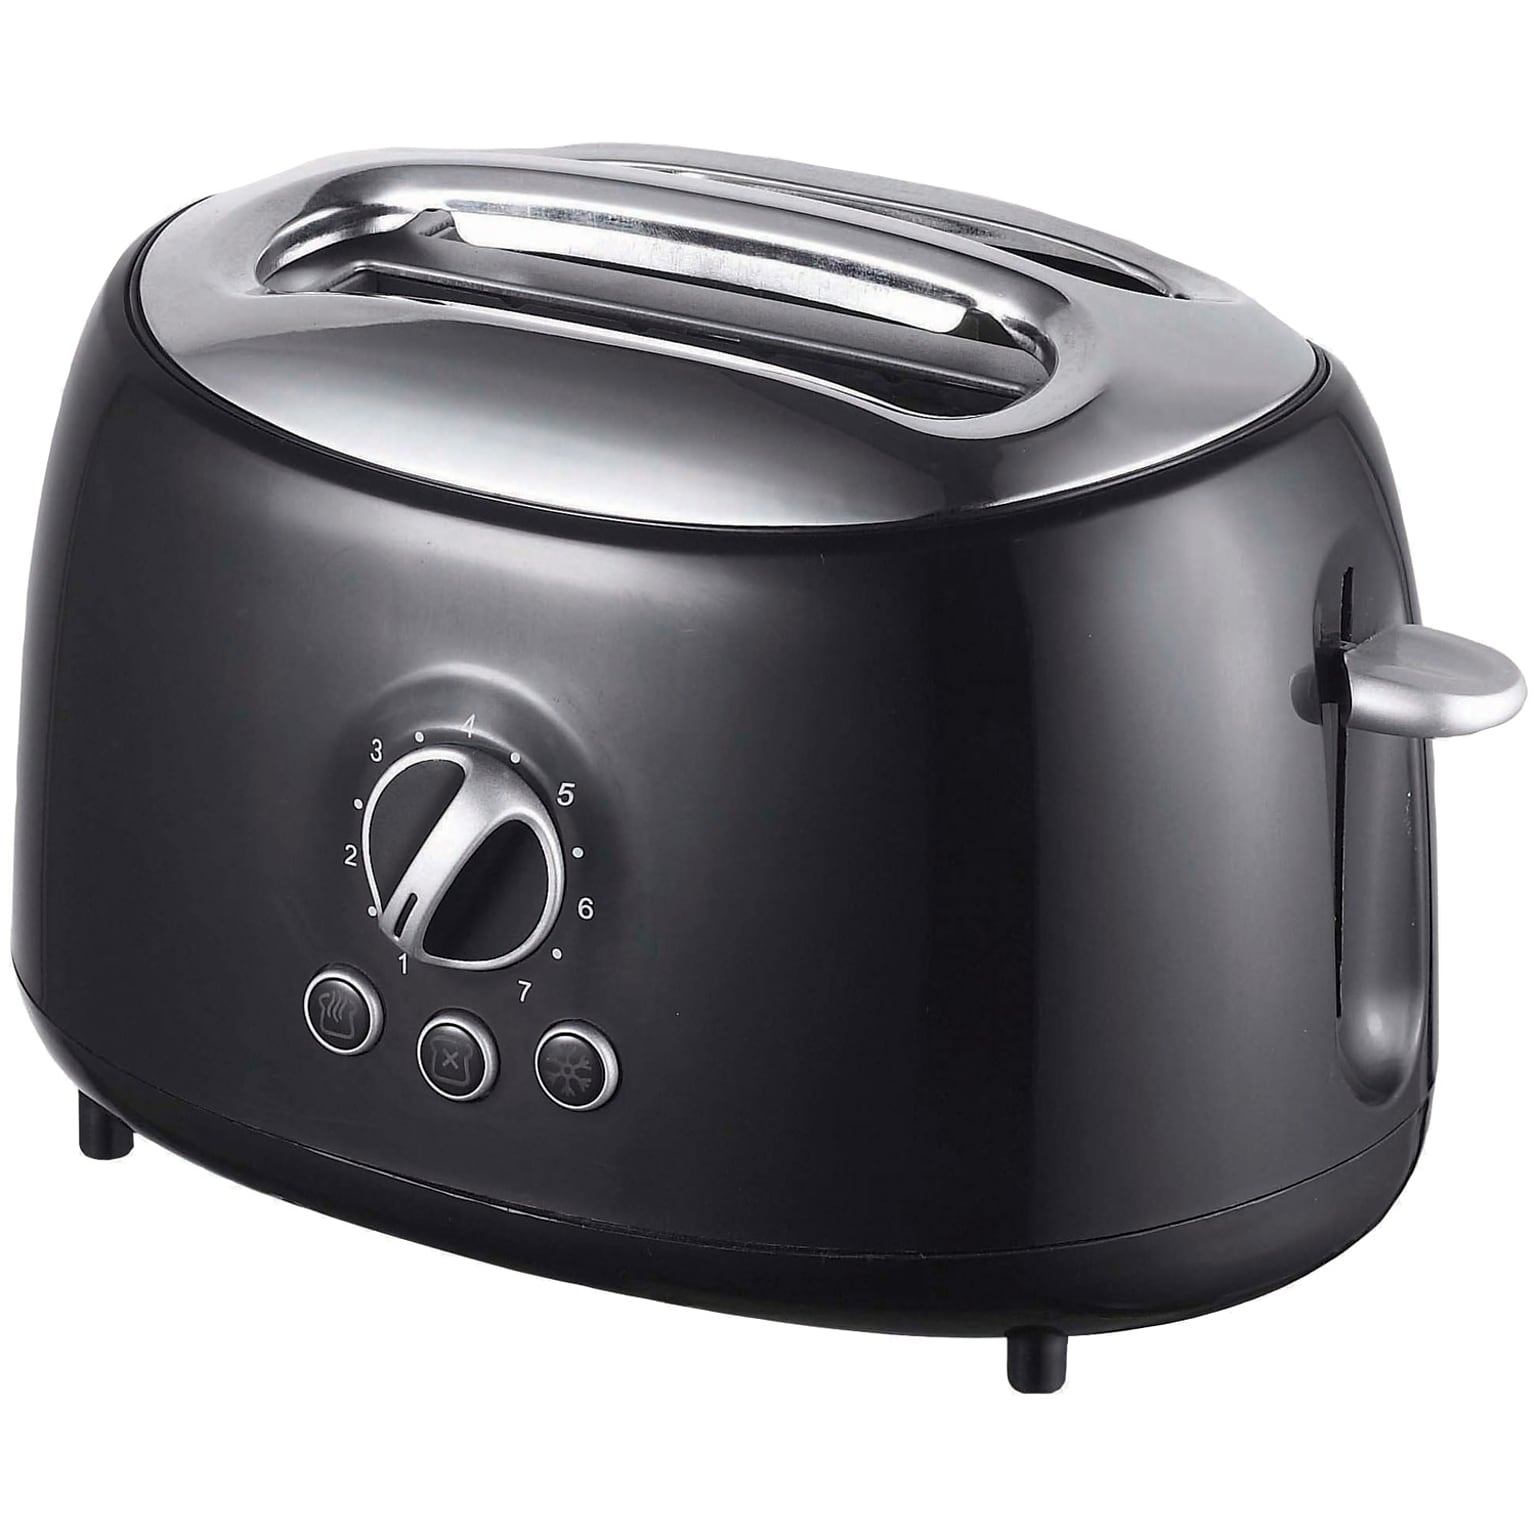 Brentwood Appliances Cool-Touch 2-Slice Retro Toaster with Extra-Wide Slots, Black (TS-270BK)